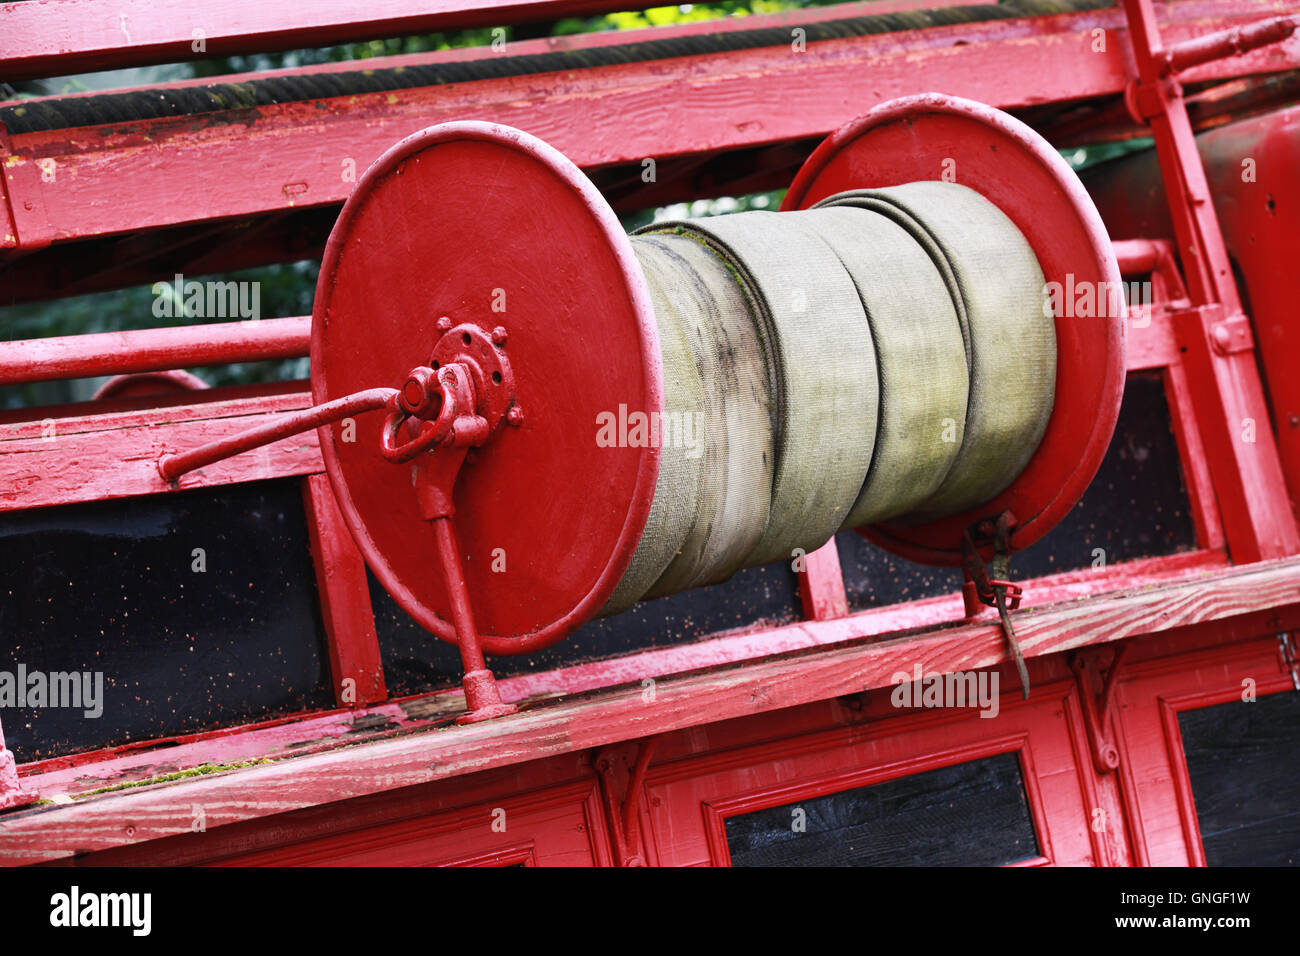 https://c8.alamy.com/comp/GNGF1W/old-red-fire-hose-reel-closeup-photo-with-selective-focus-GNGF1W.jpg